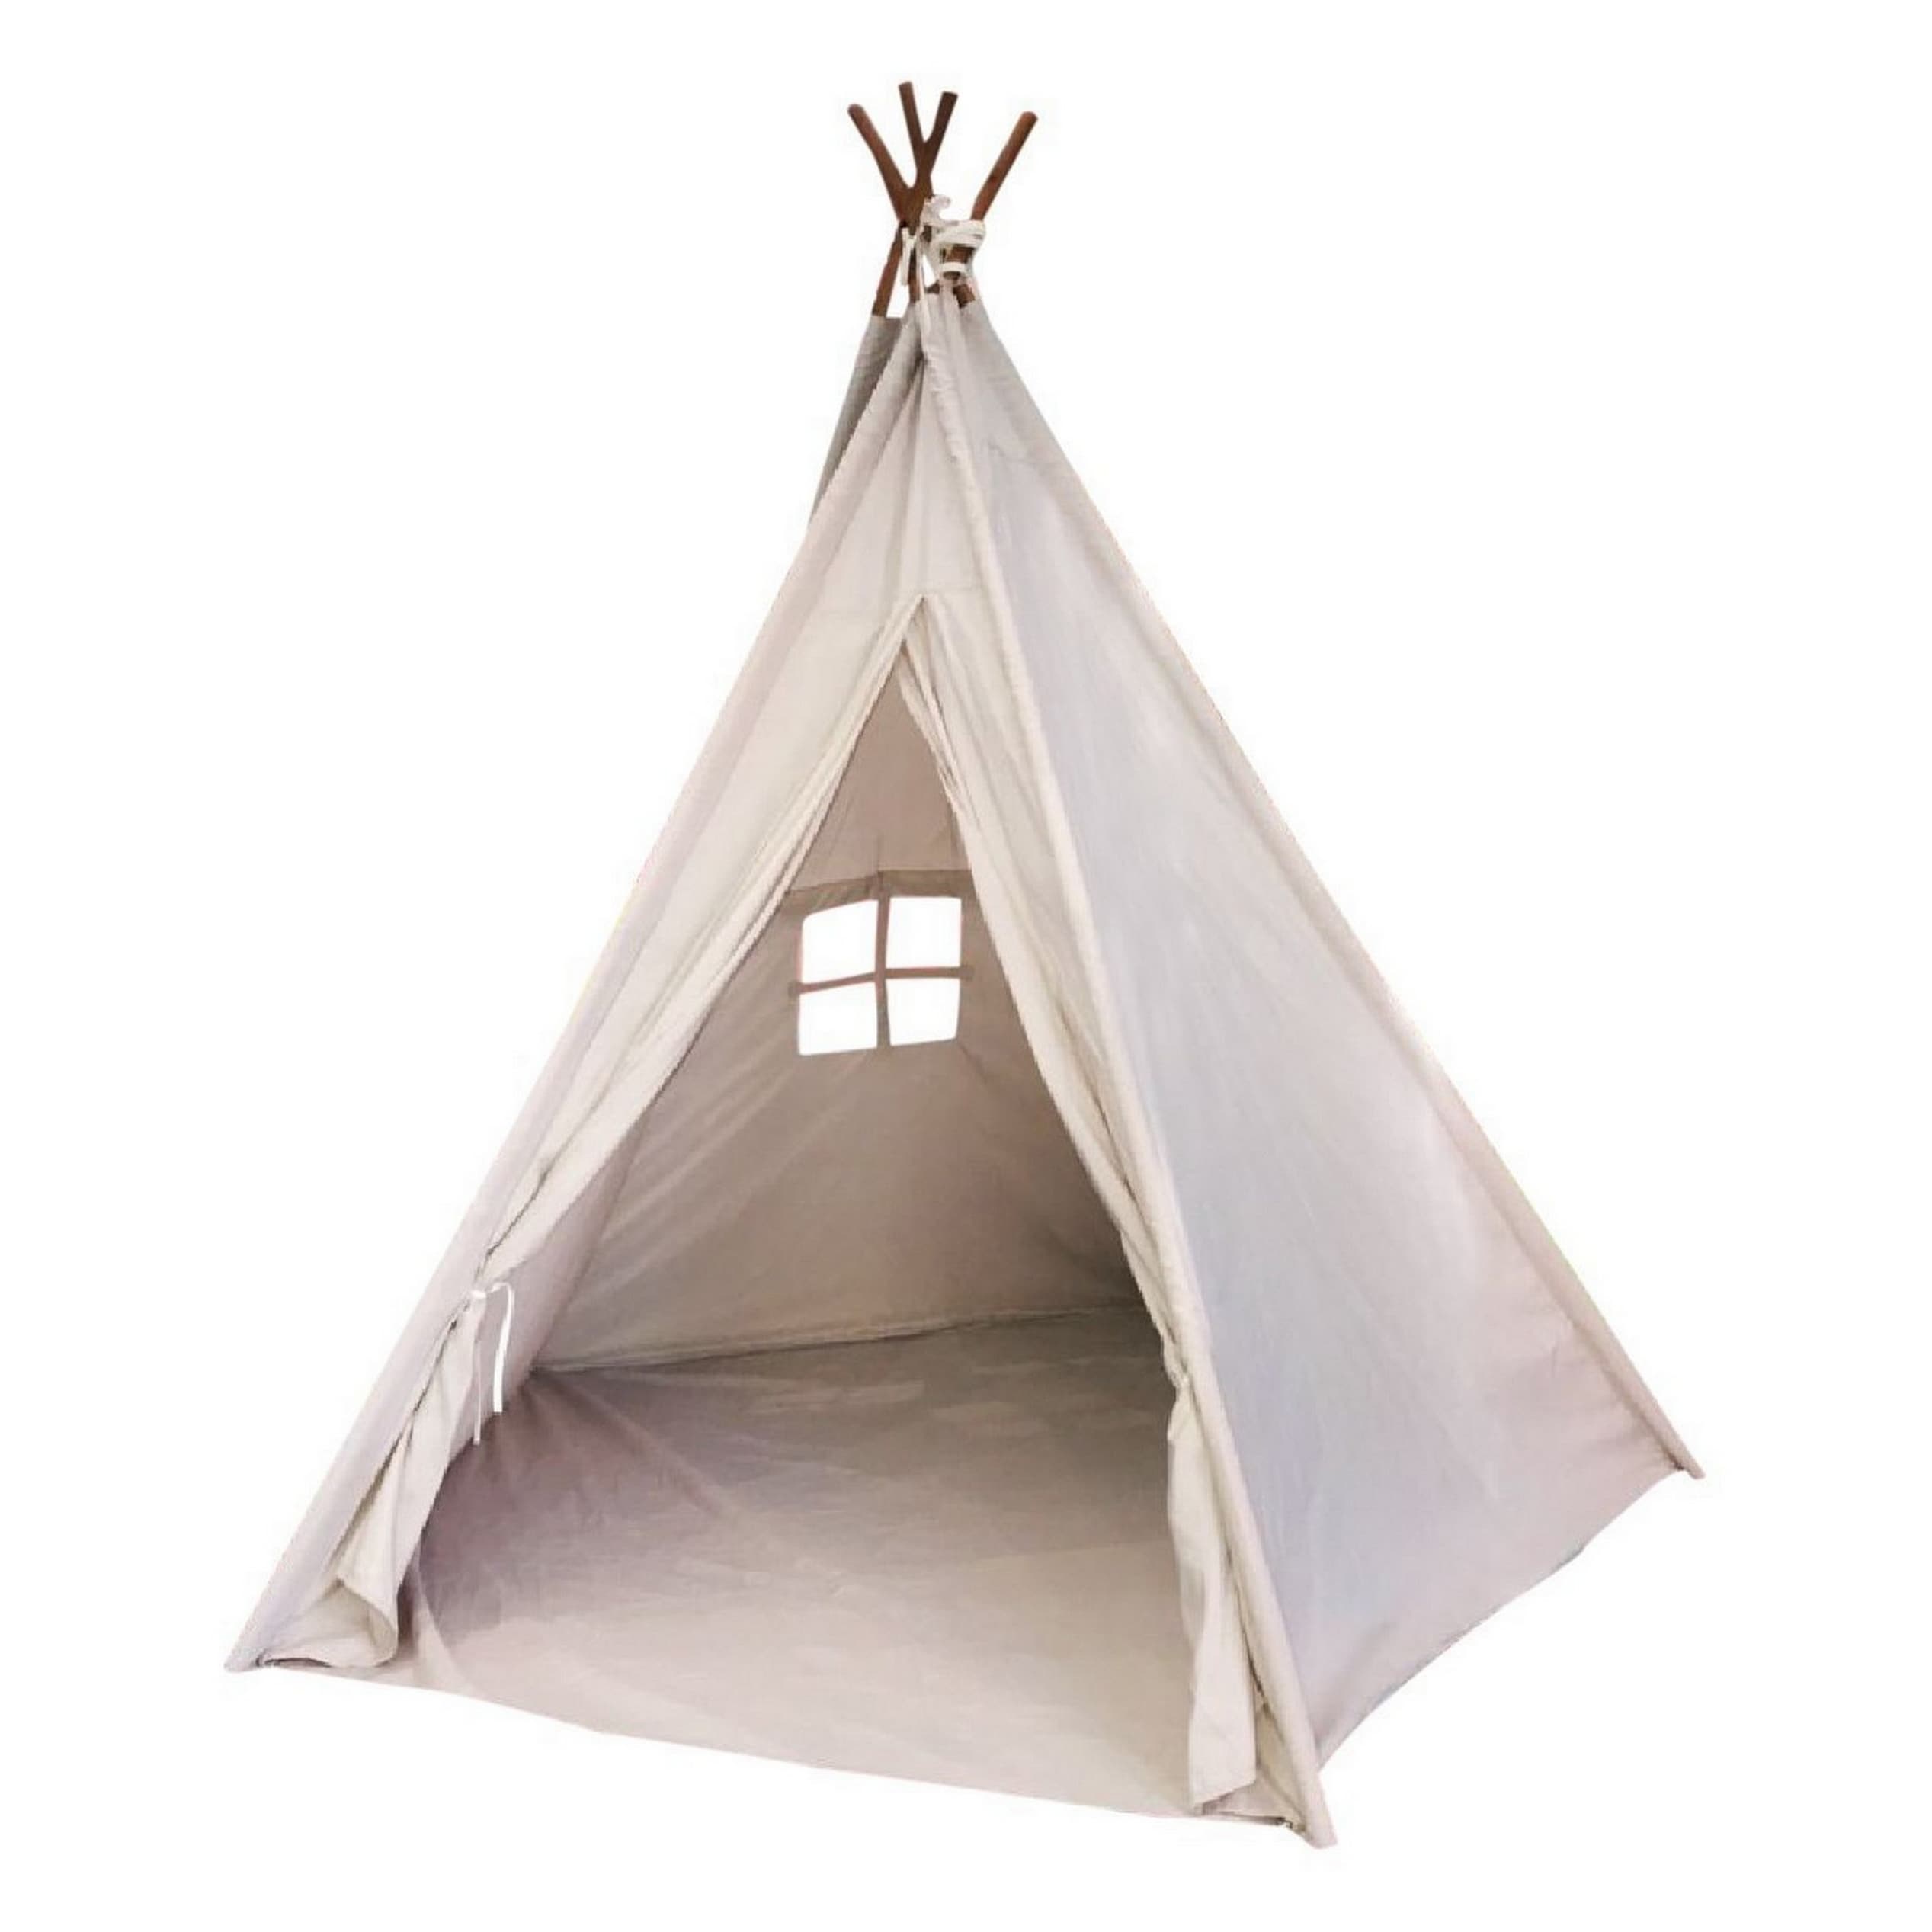 Details about   Large Cotton Blend Canvas Chevron Teepee Tent for Kids Teepee Tent Indoor Out... 